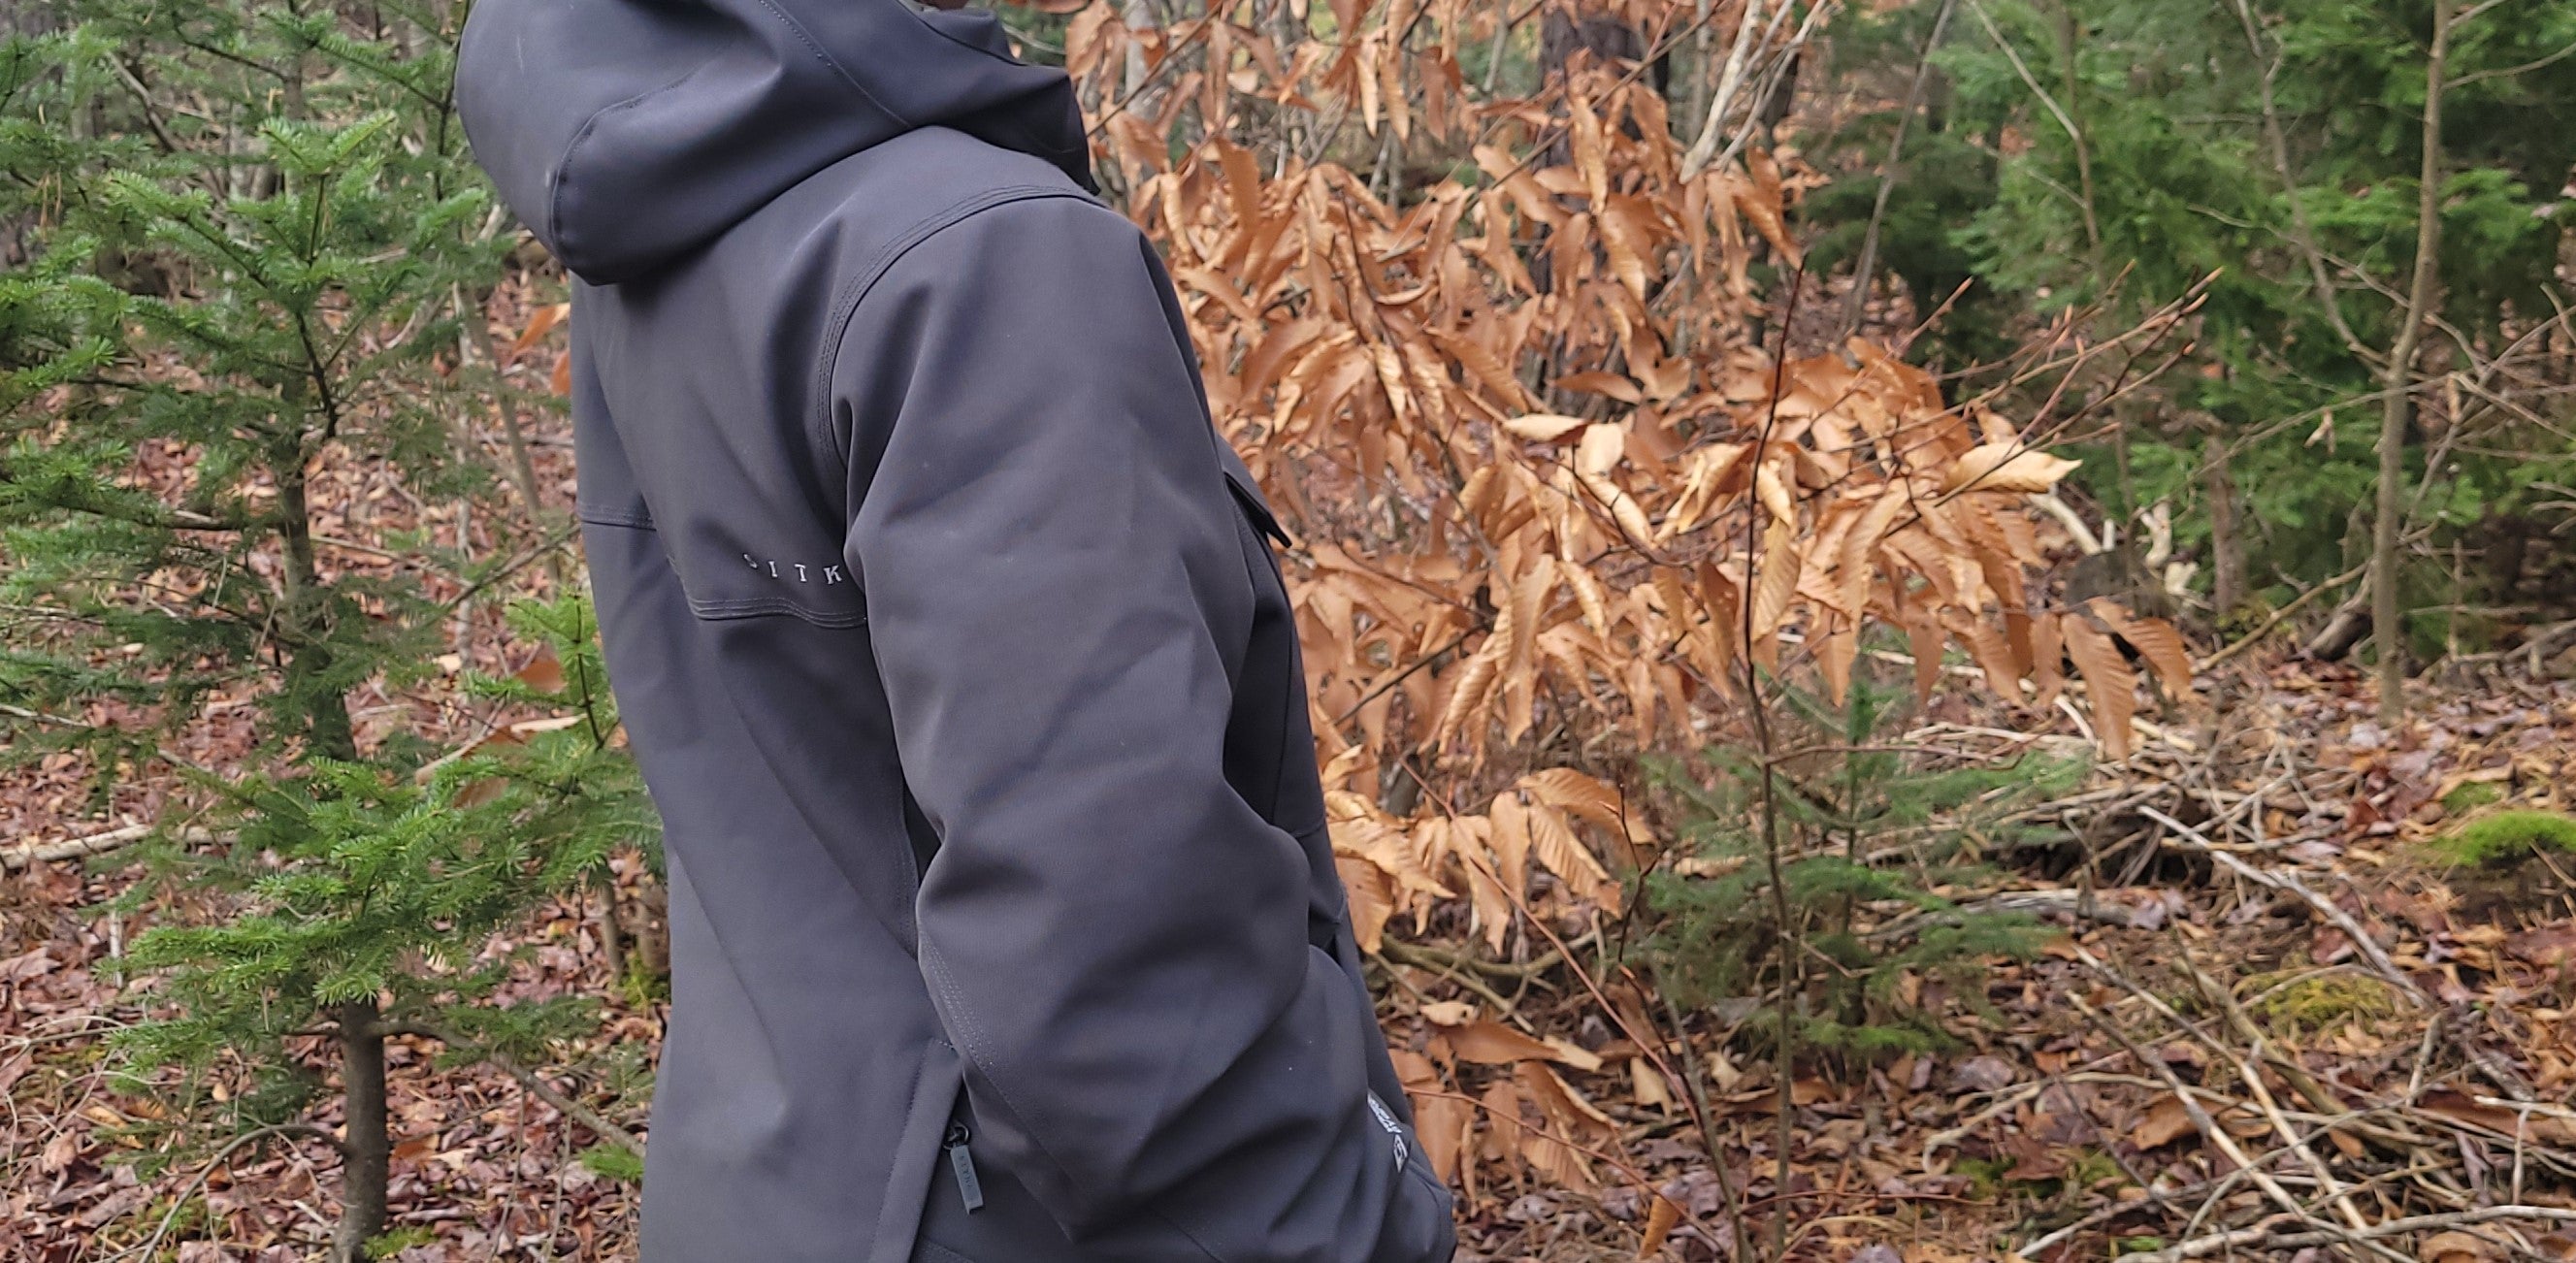 Gear Check: SITKA Grindstone Work Jacket - It Isn’t Just for the Boys